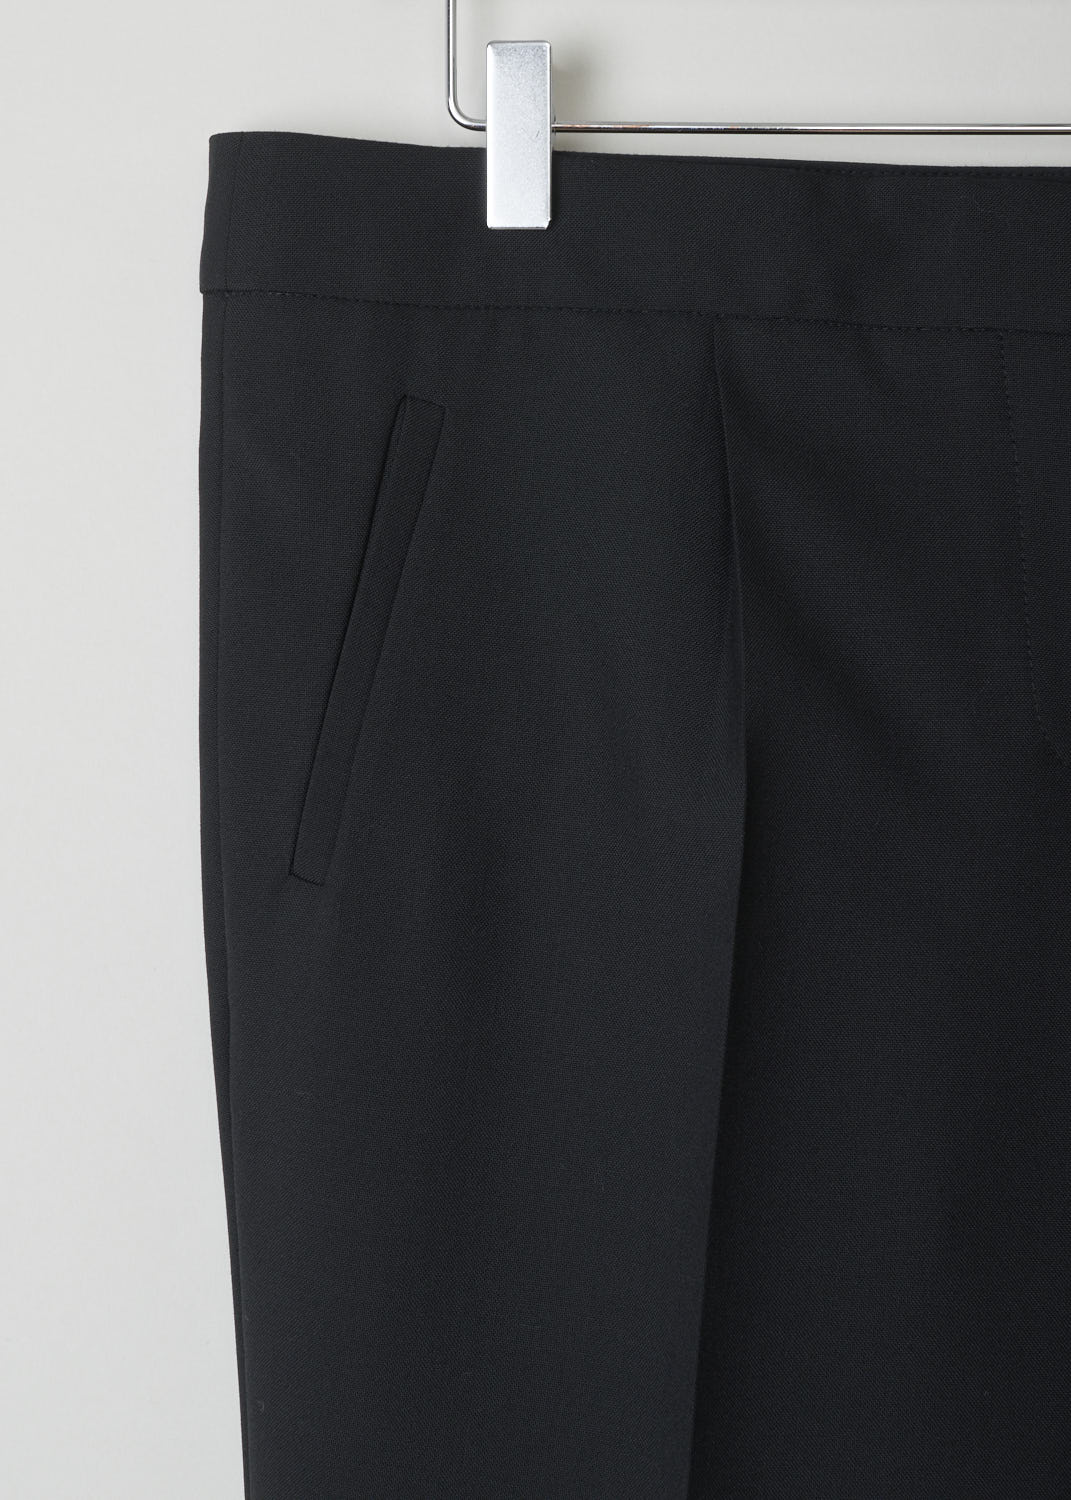 BALENCIAGA, CLASSIC BLACK PANTS WITH SUBTLE ZIPPER DETAIL, 329181_TCJ69_1000, Black, Detail, This classic black pants has front creases along the length of the legs. These same creases can also be found on the back of the legs. On the front, welt pockets can be found on either side. On the ends of the legs, concealed zippers can be found that open to about ankle height.
